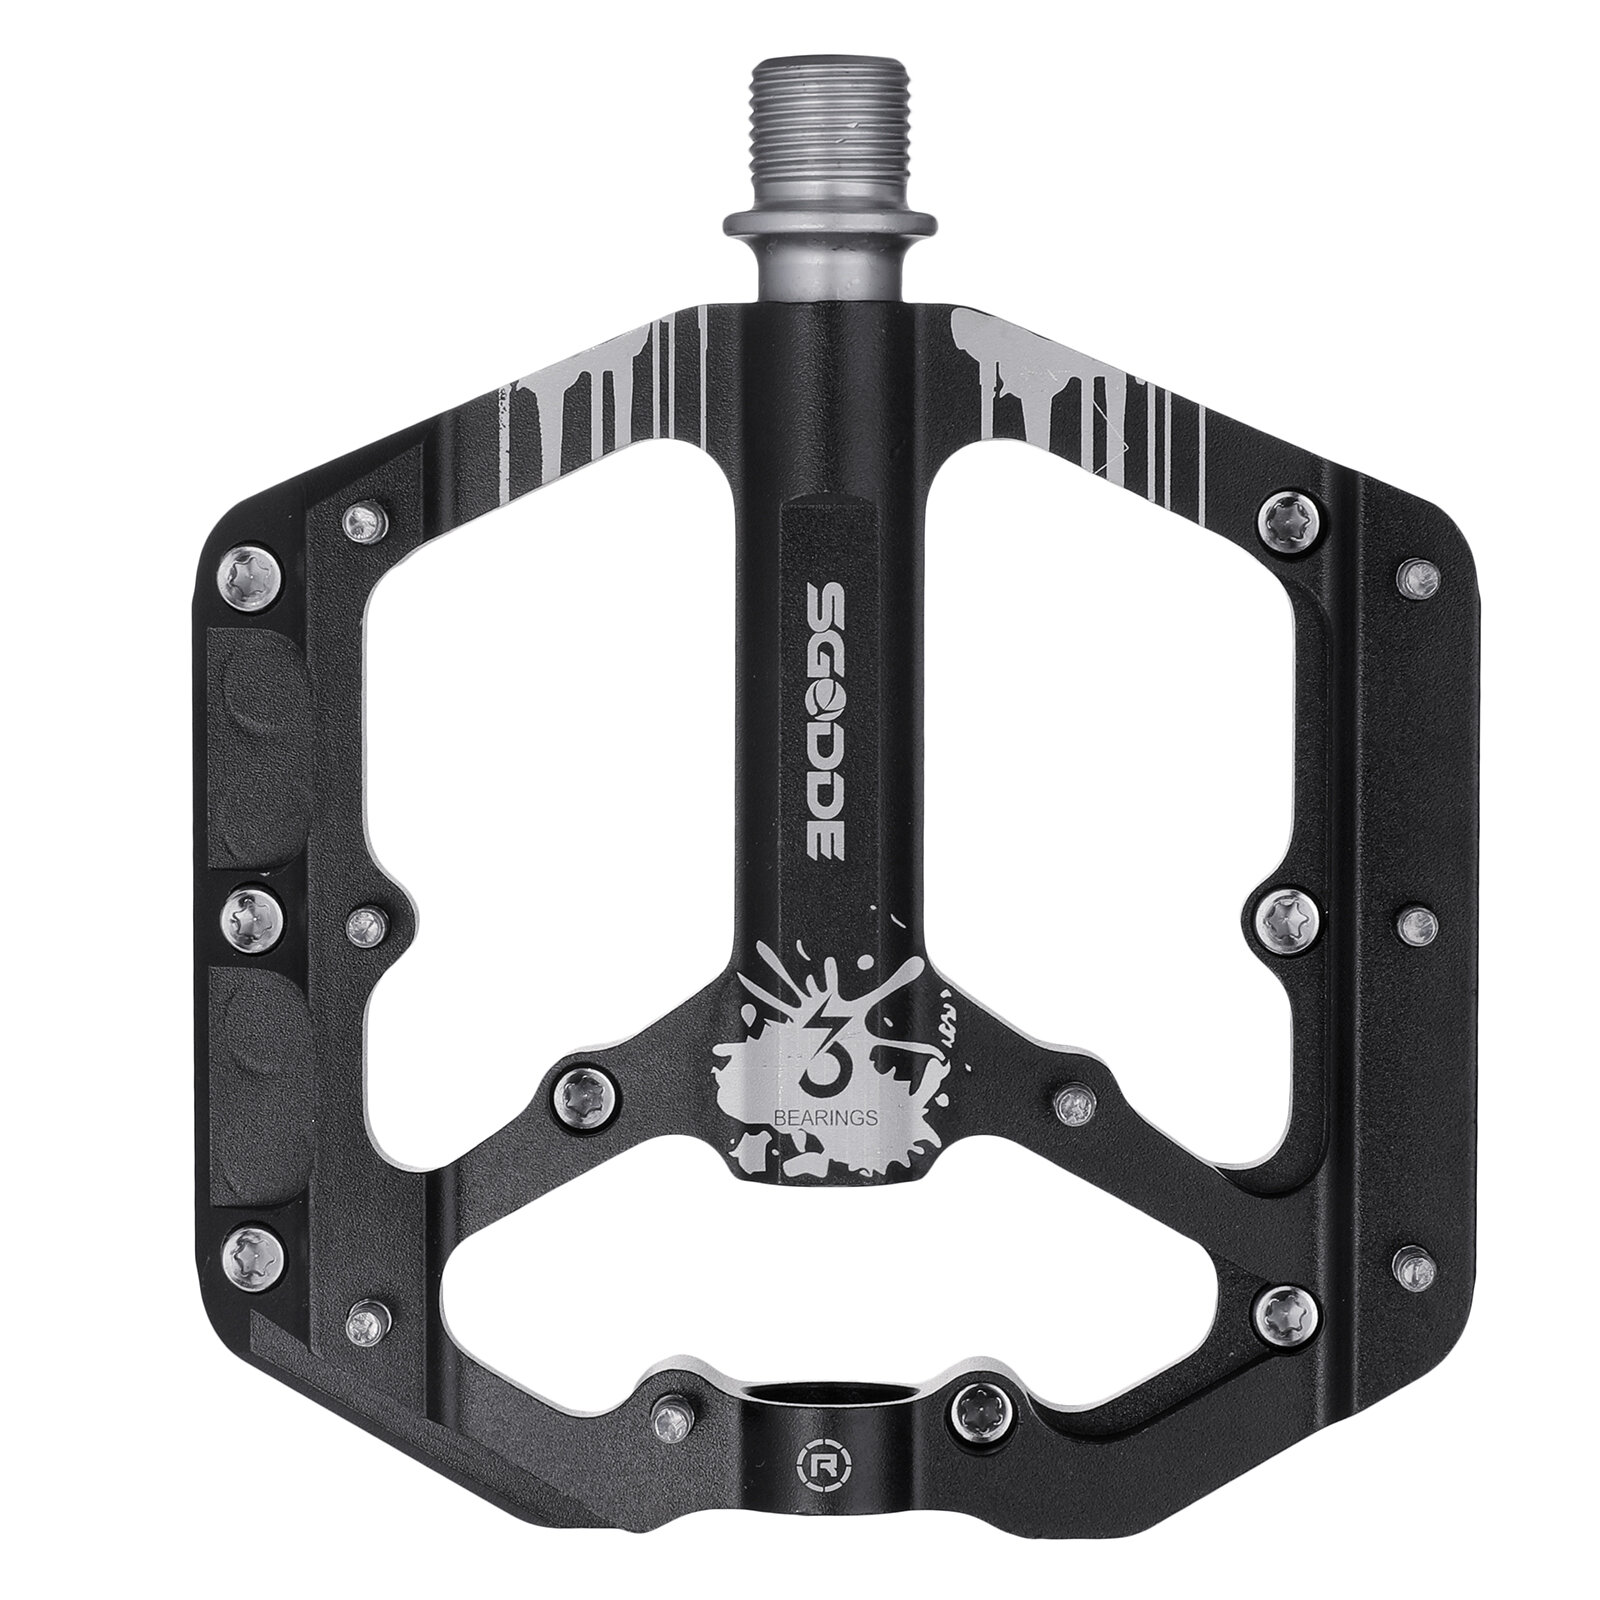 SGODDE Mountain Bike Non-Slip Pedals Bicycle Flat Platform Alloy Pedals Outdoor Cycling Flat Pedals for Road BMX Mtb bic